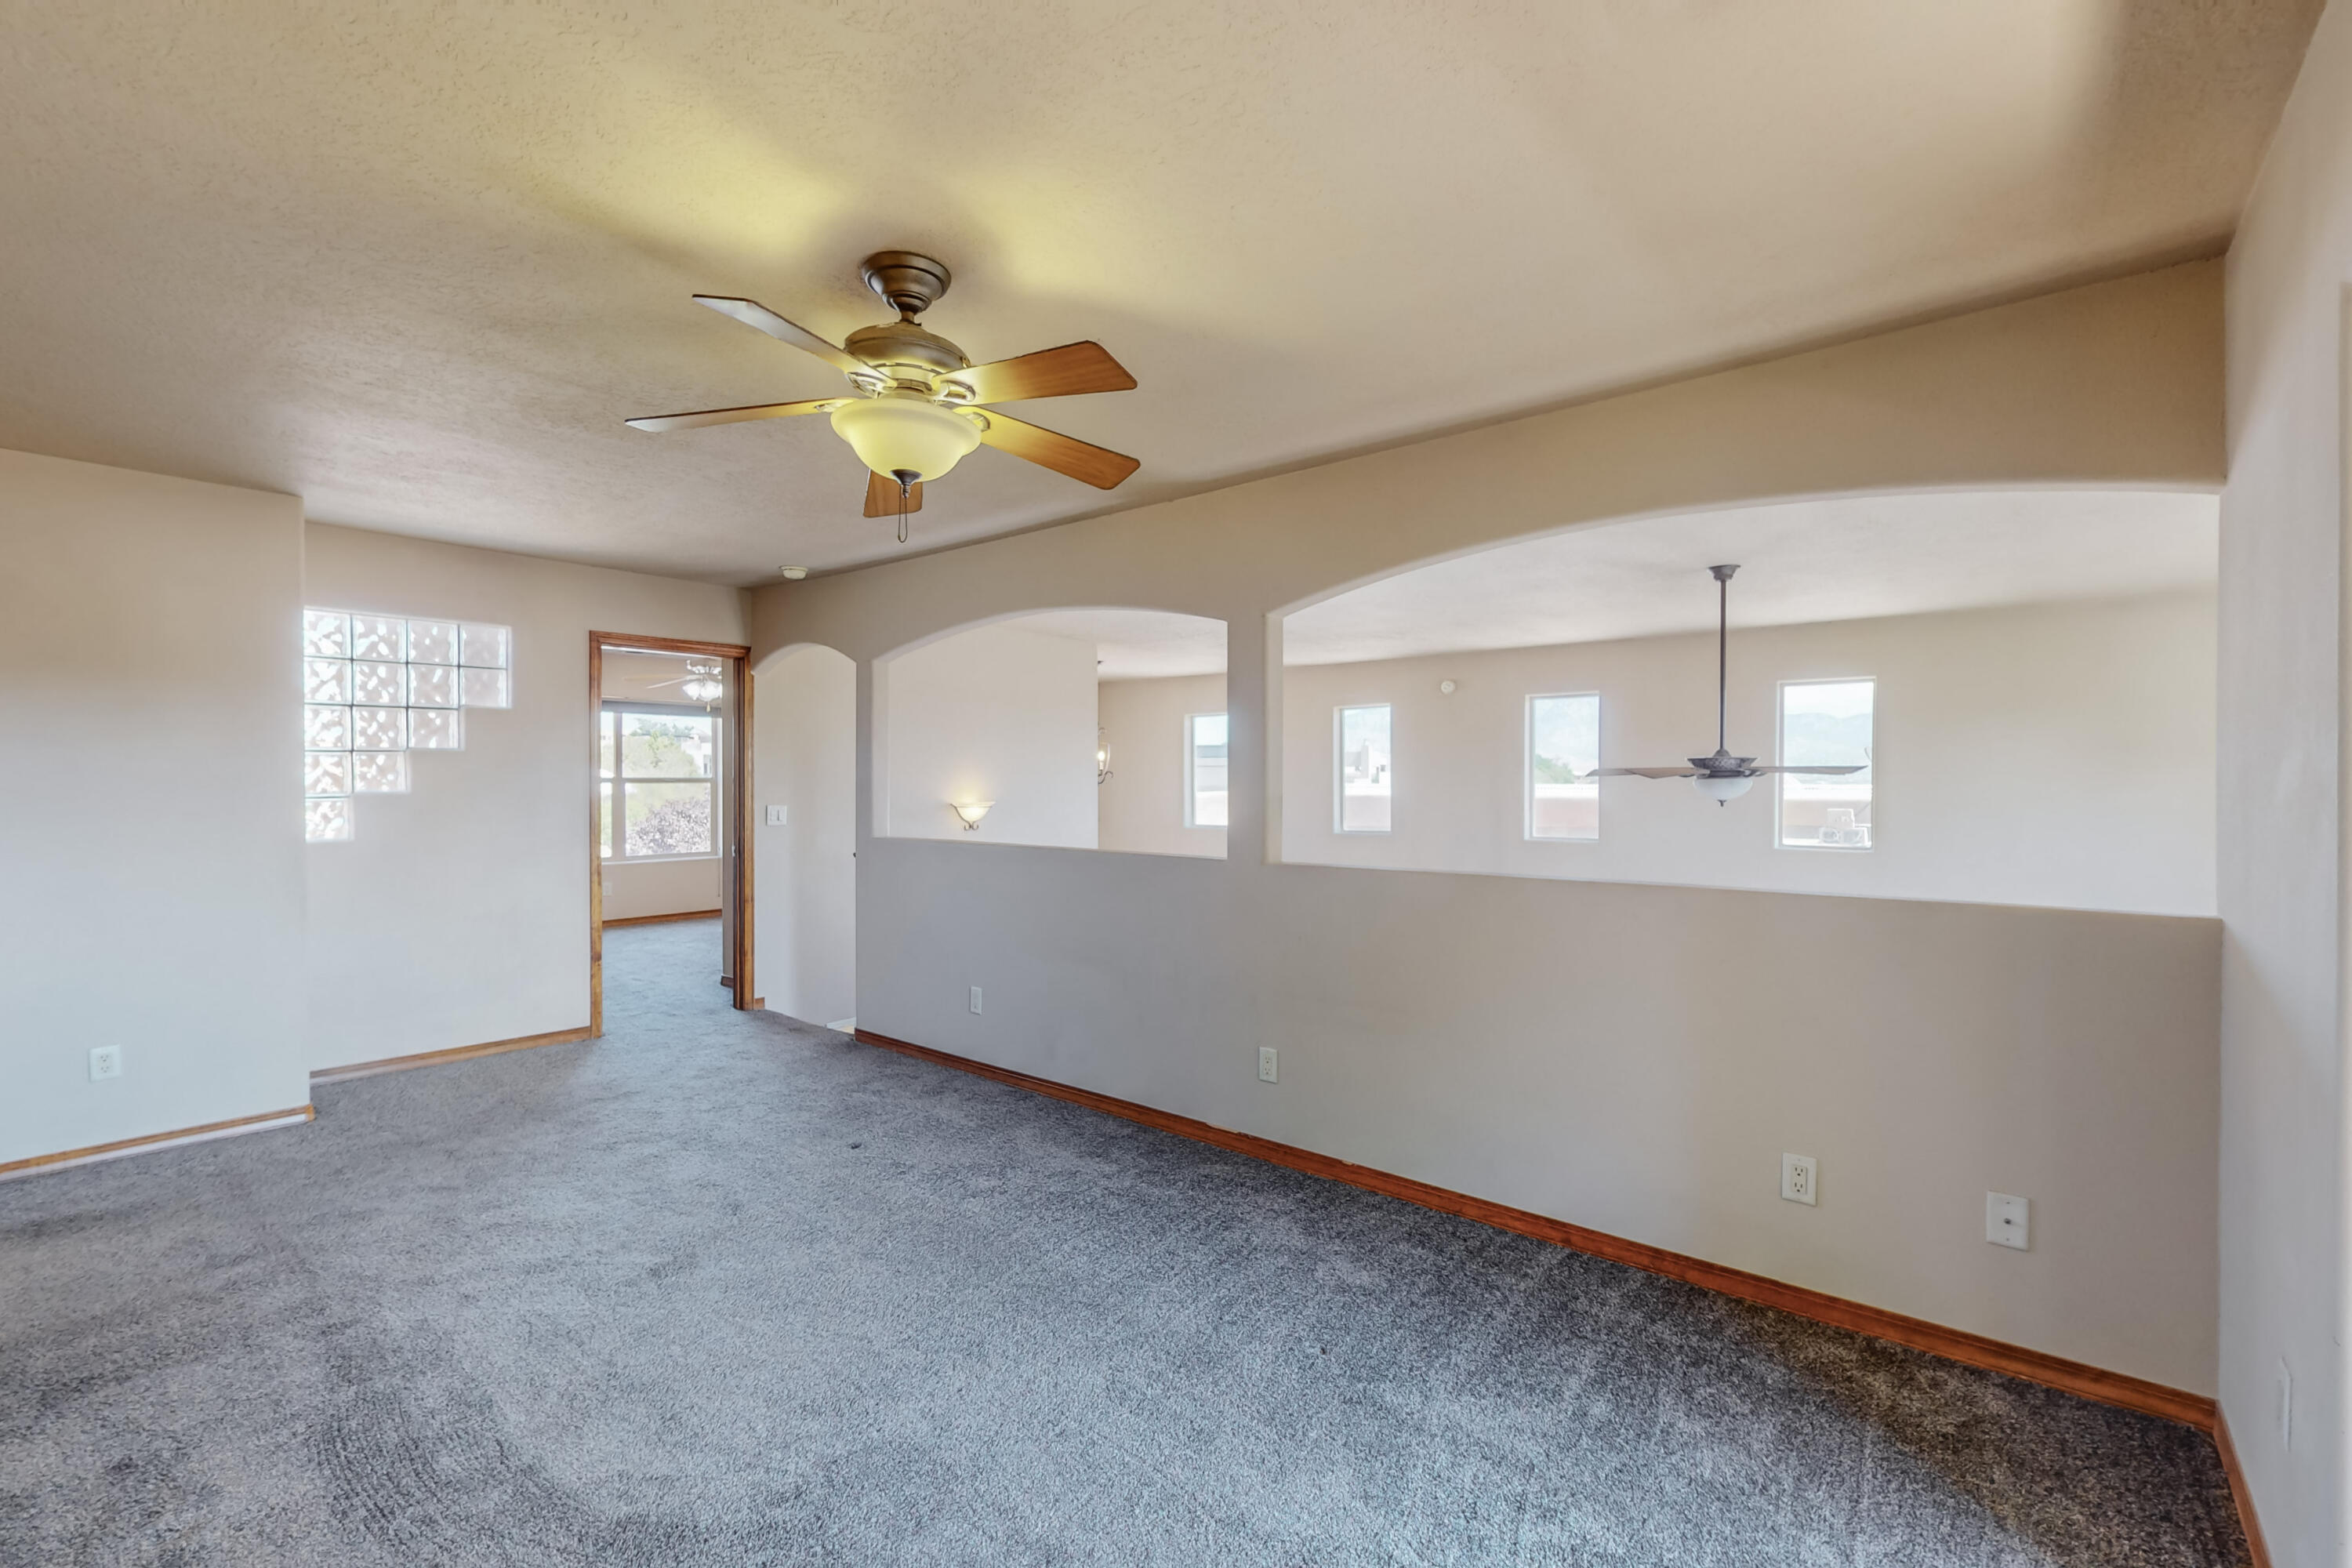 4600 Allegheny Court NW, Albuquerque, New Mexico 87114, 3 Bedrooms Bedrooms, ,3 BathroomsBathrooms,Residential,For Sale,4600 Allegheny Court NW,1041268